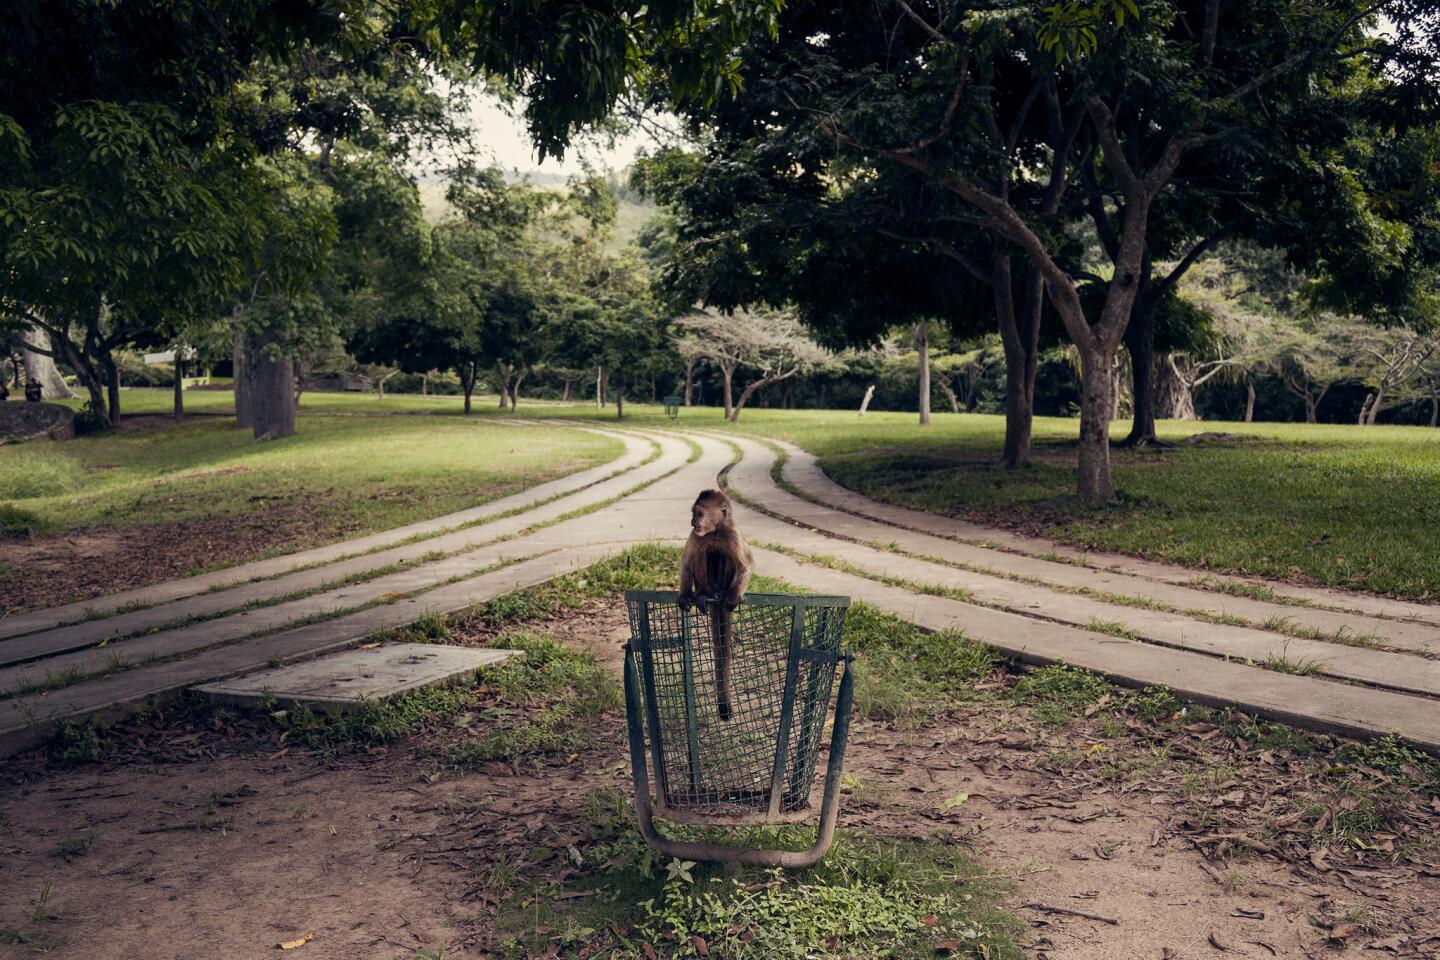 A monkey uses a trash can as a perch in the Caricuao zoo on July 12, 2017. It scavenged around before following a family that was having lunch. In the zoo, attendance is at an all-time low and kiosks don't open until lunch because ticket sales are so low.